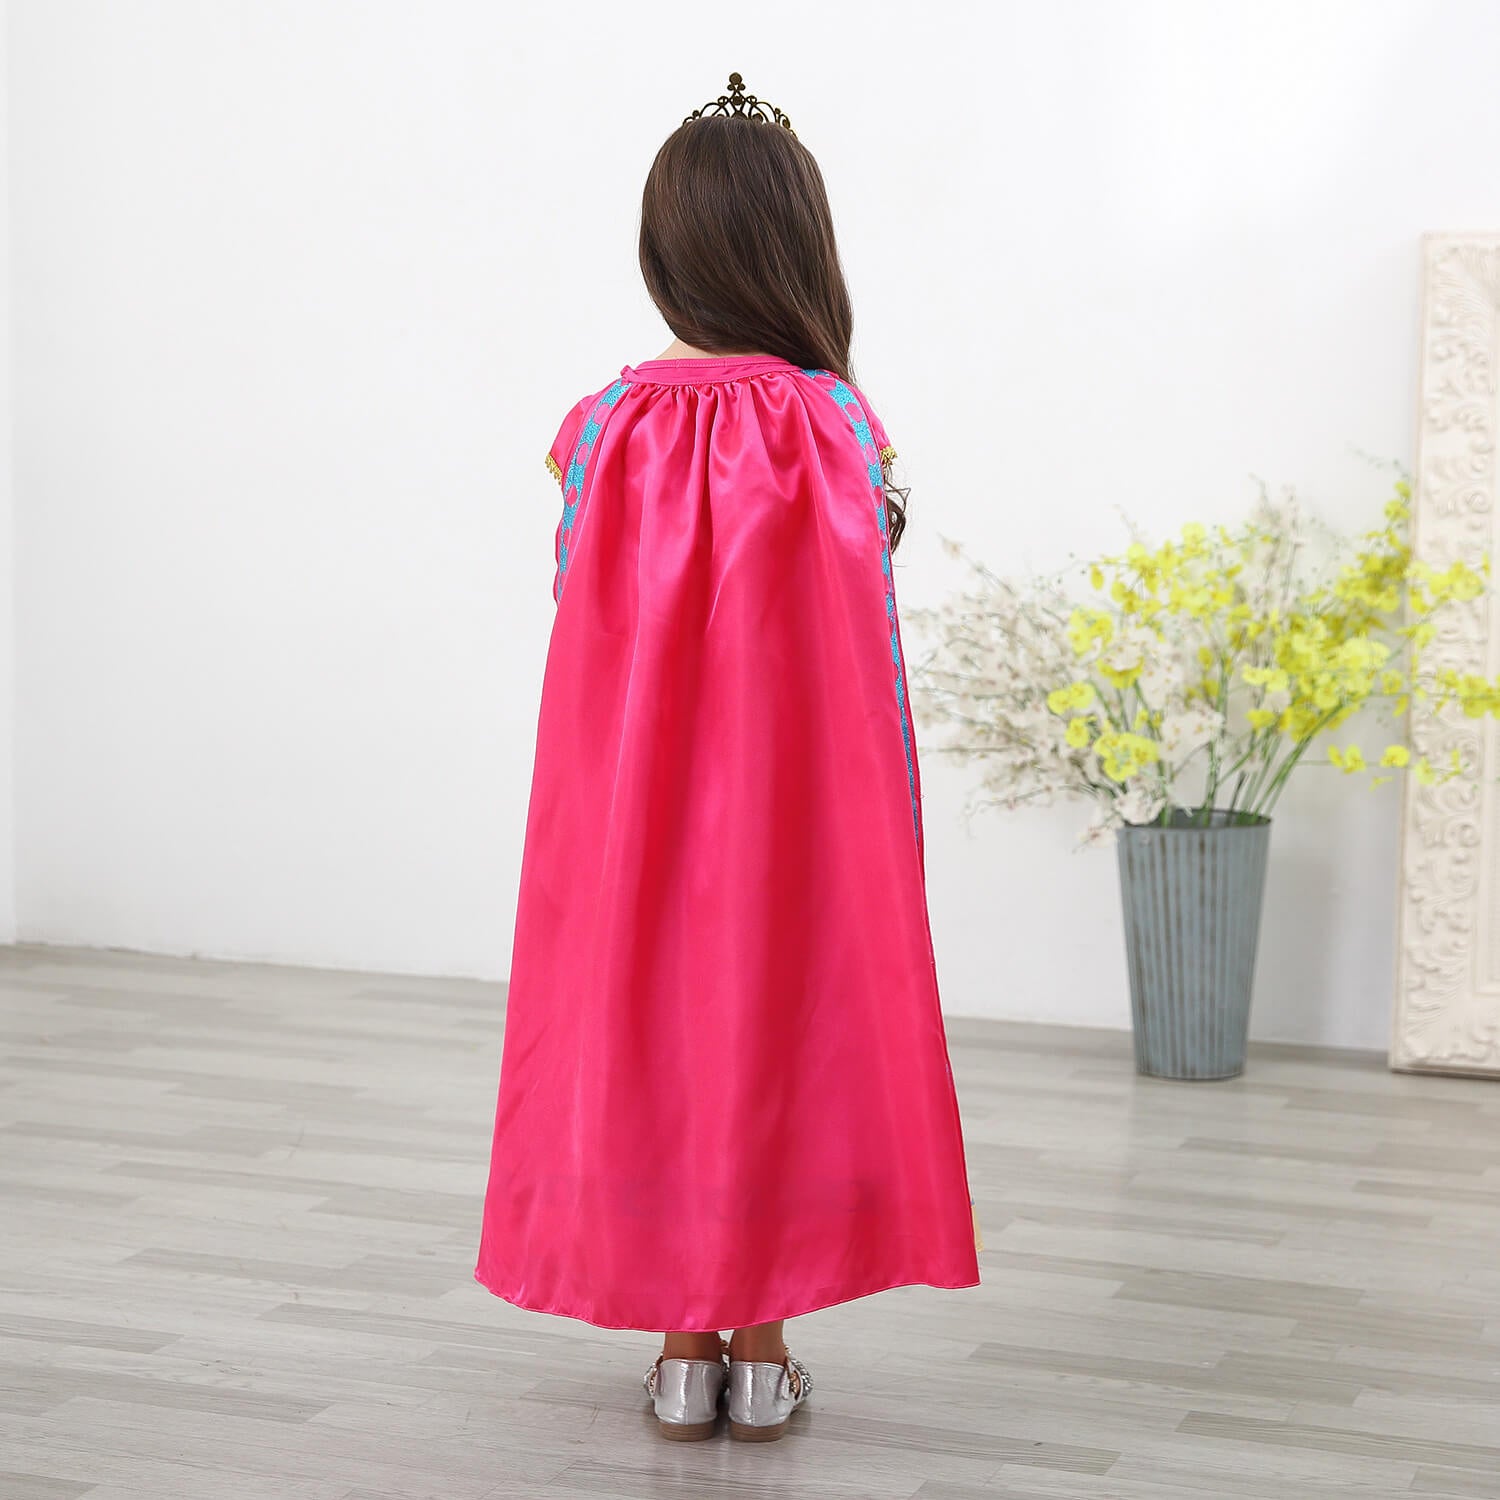 Role Playing Dress For Girls Kids Princess Costume Children Dress Up Halloween Party Outfits With Cloak